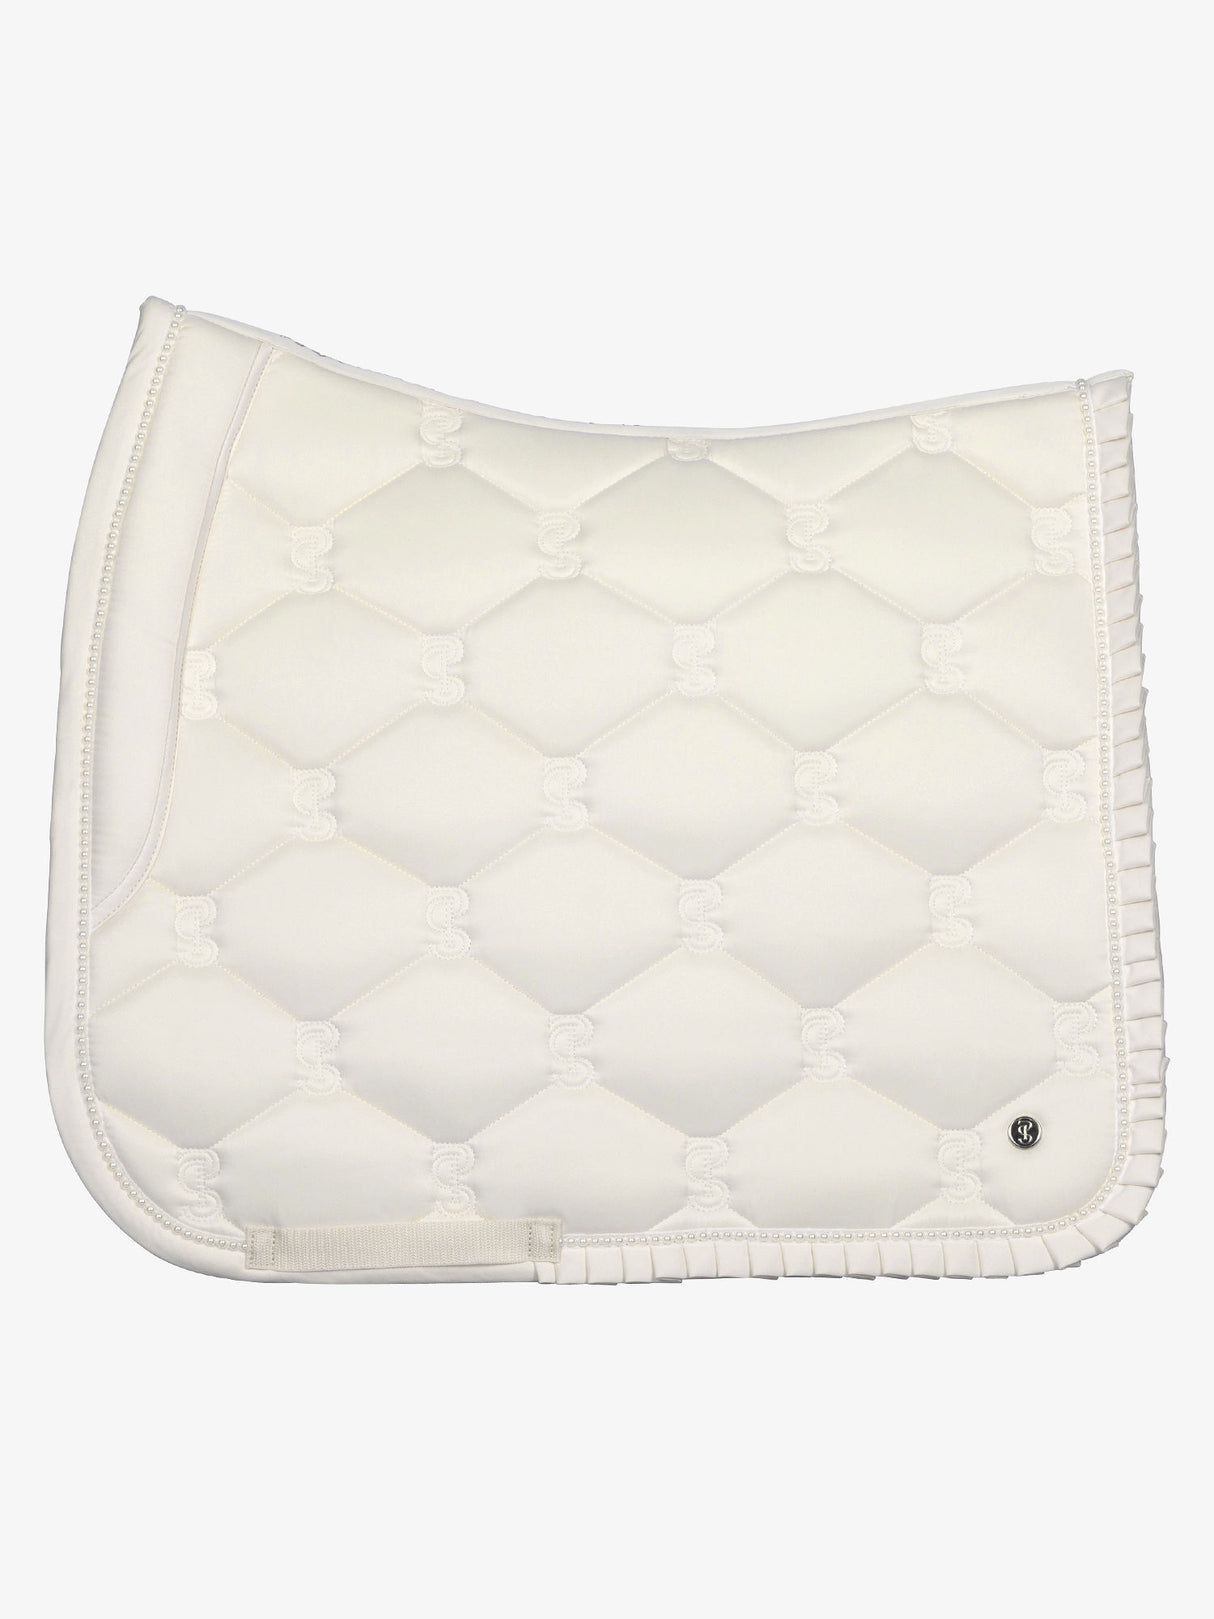 PS of Sweden Pearl Ruffle Dressage Saddle Pad Off White